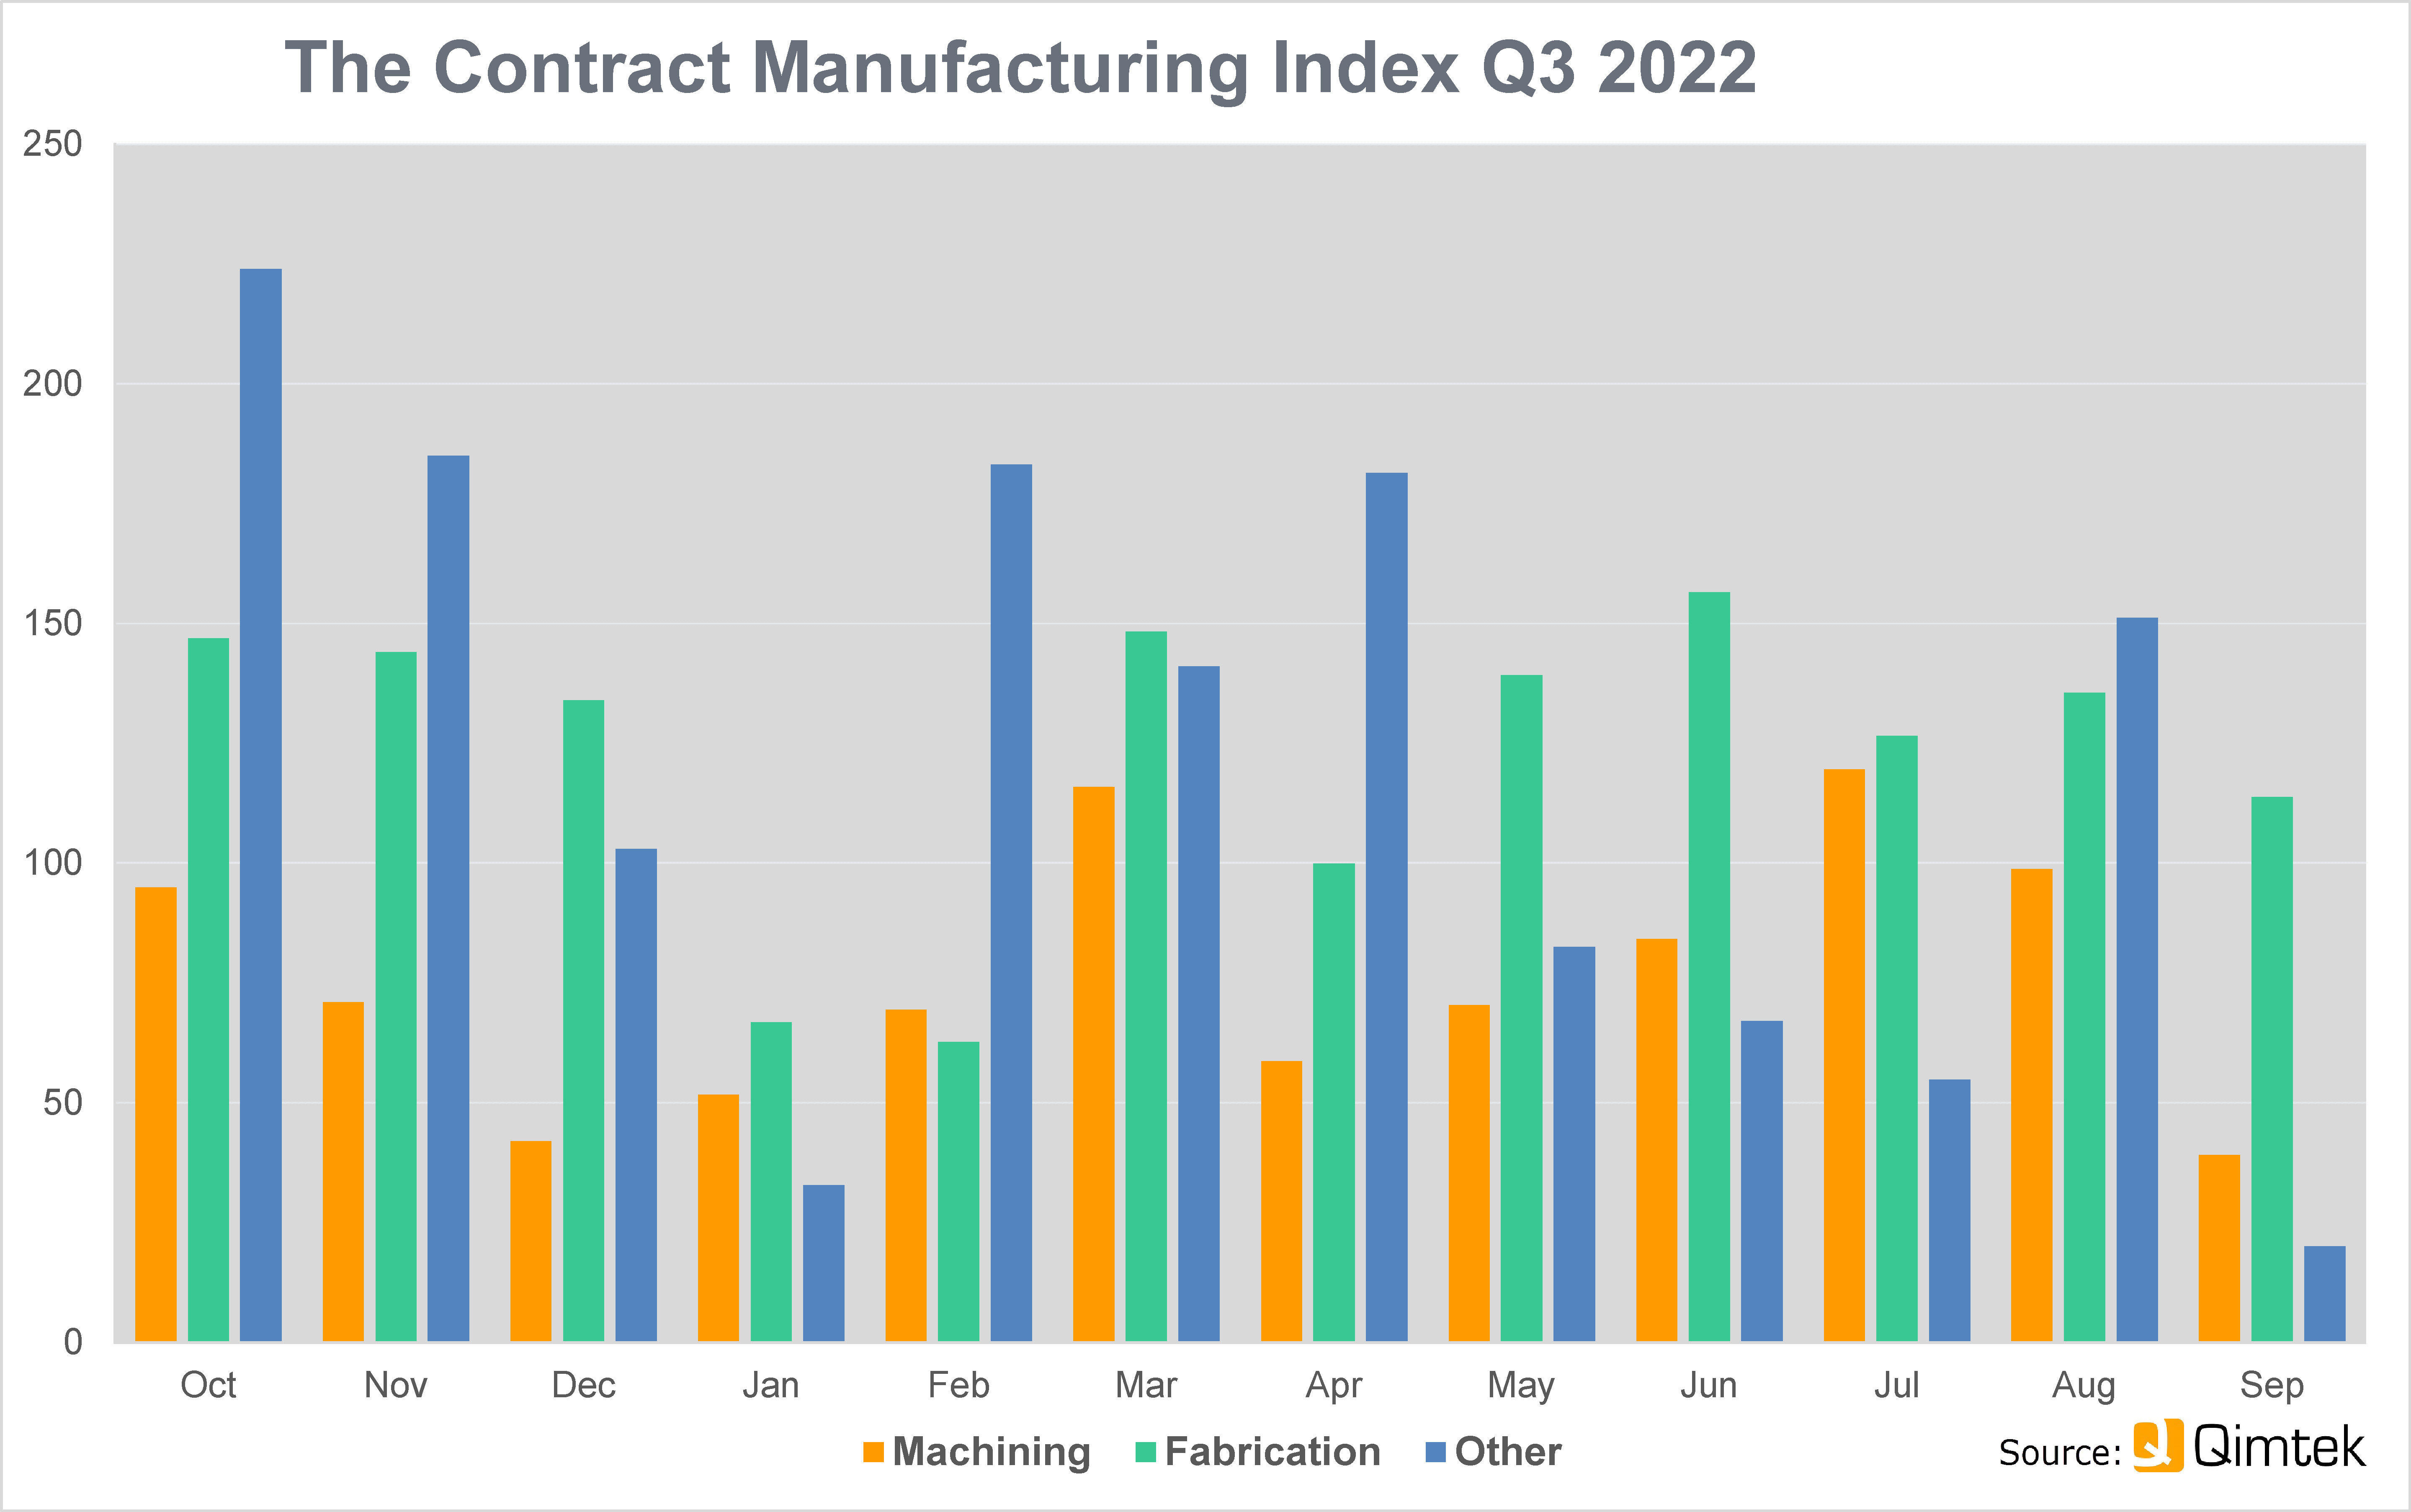 Subcontract manufacturing holds steady